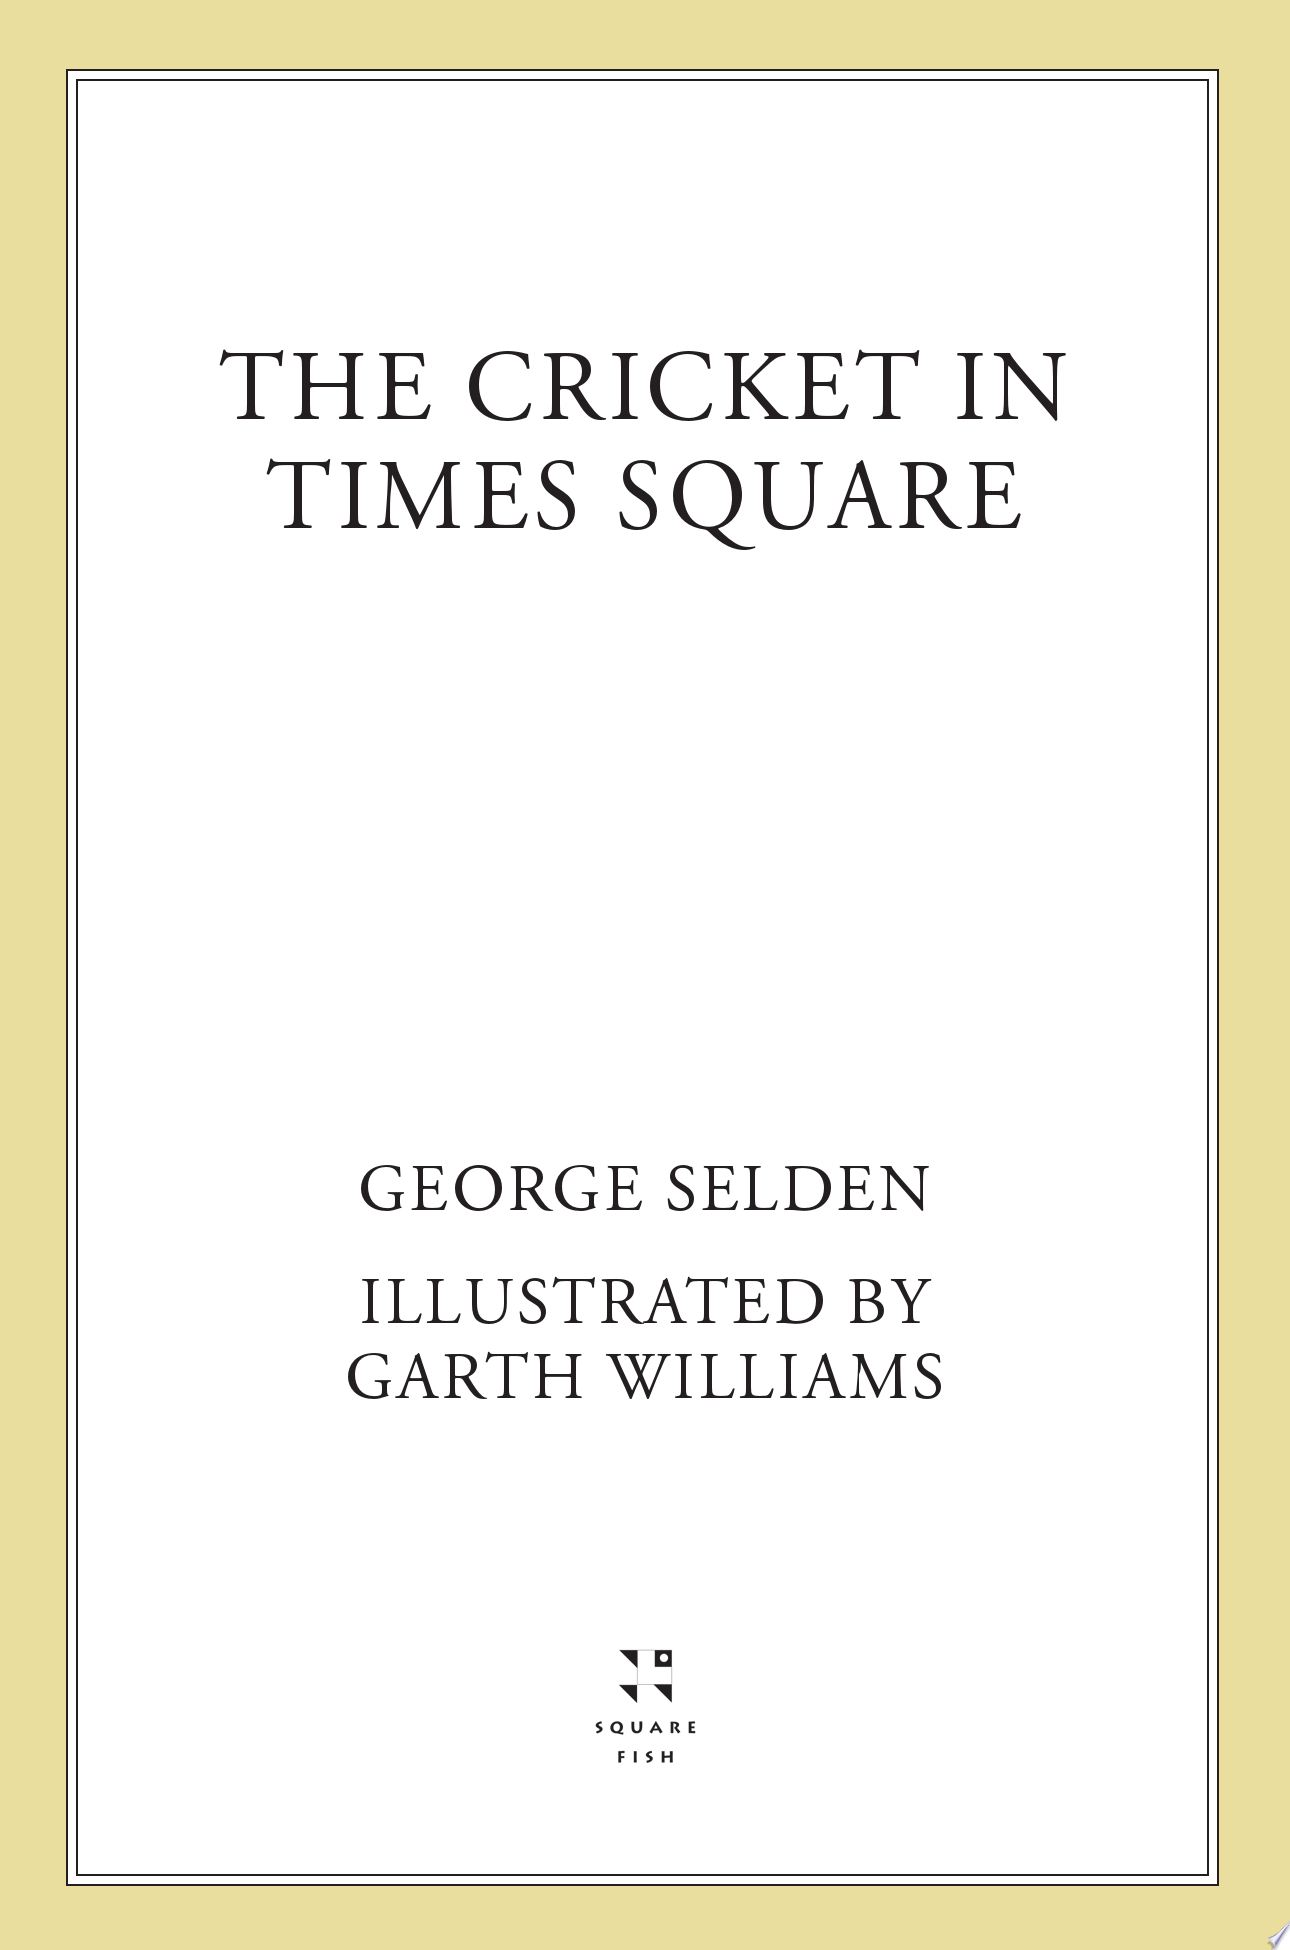 Image for "The Cricket in Times Square"